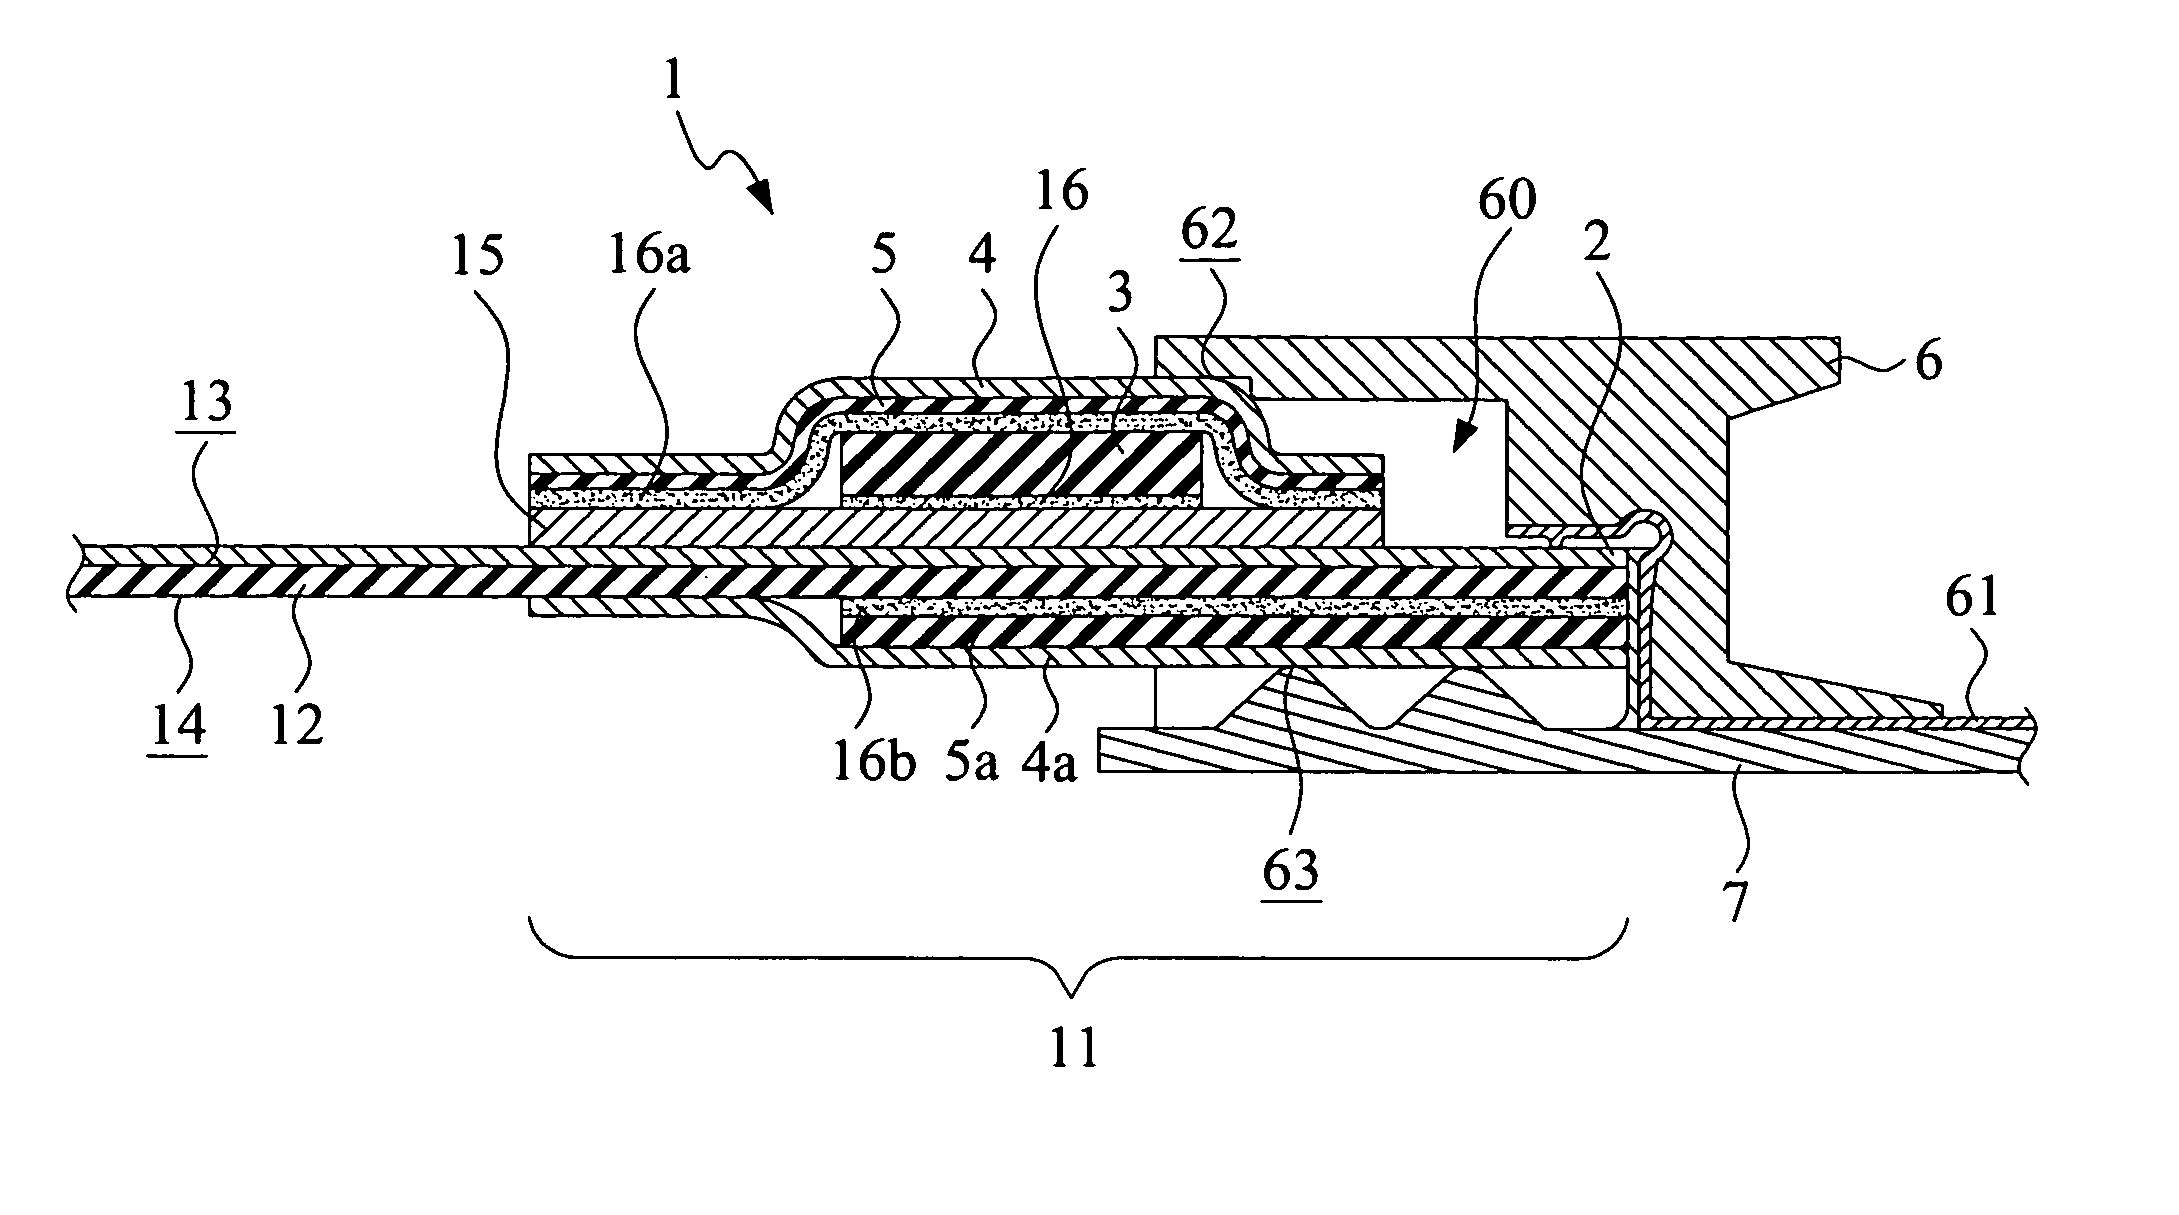 Flexible-circuit-board cable with positioning structure for insertion